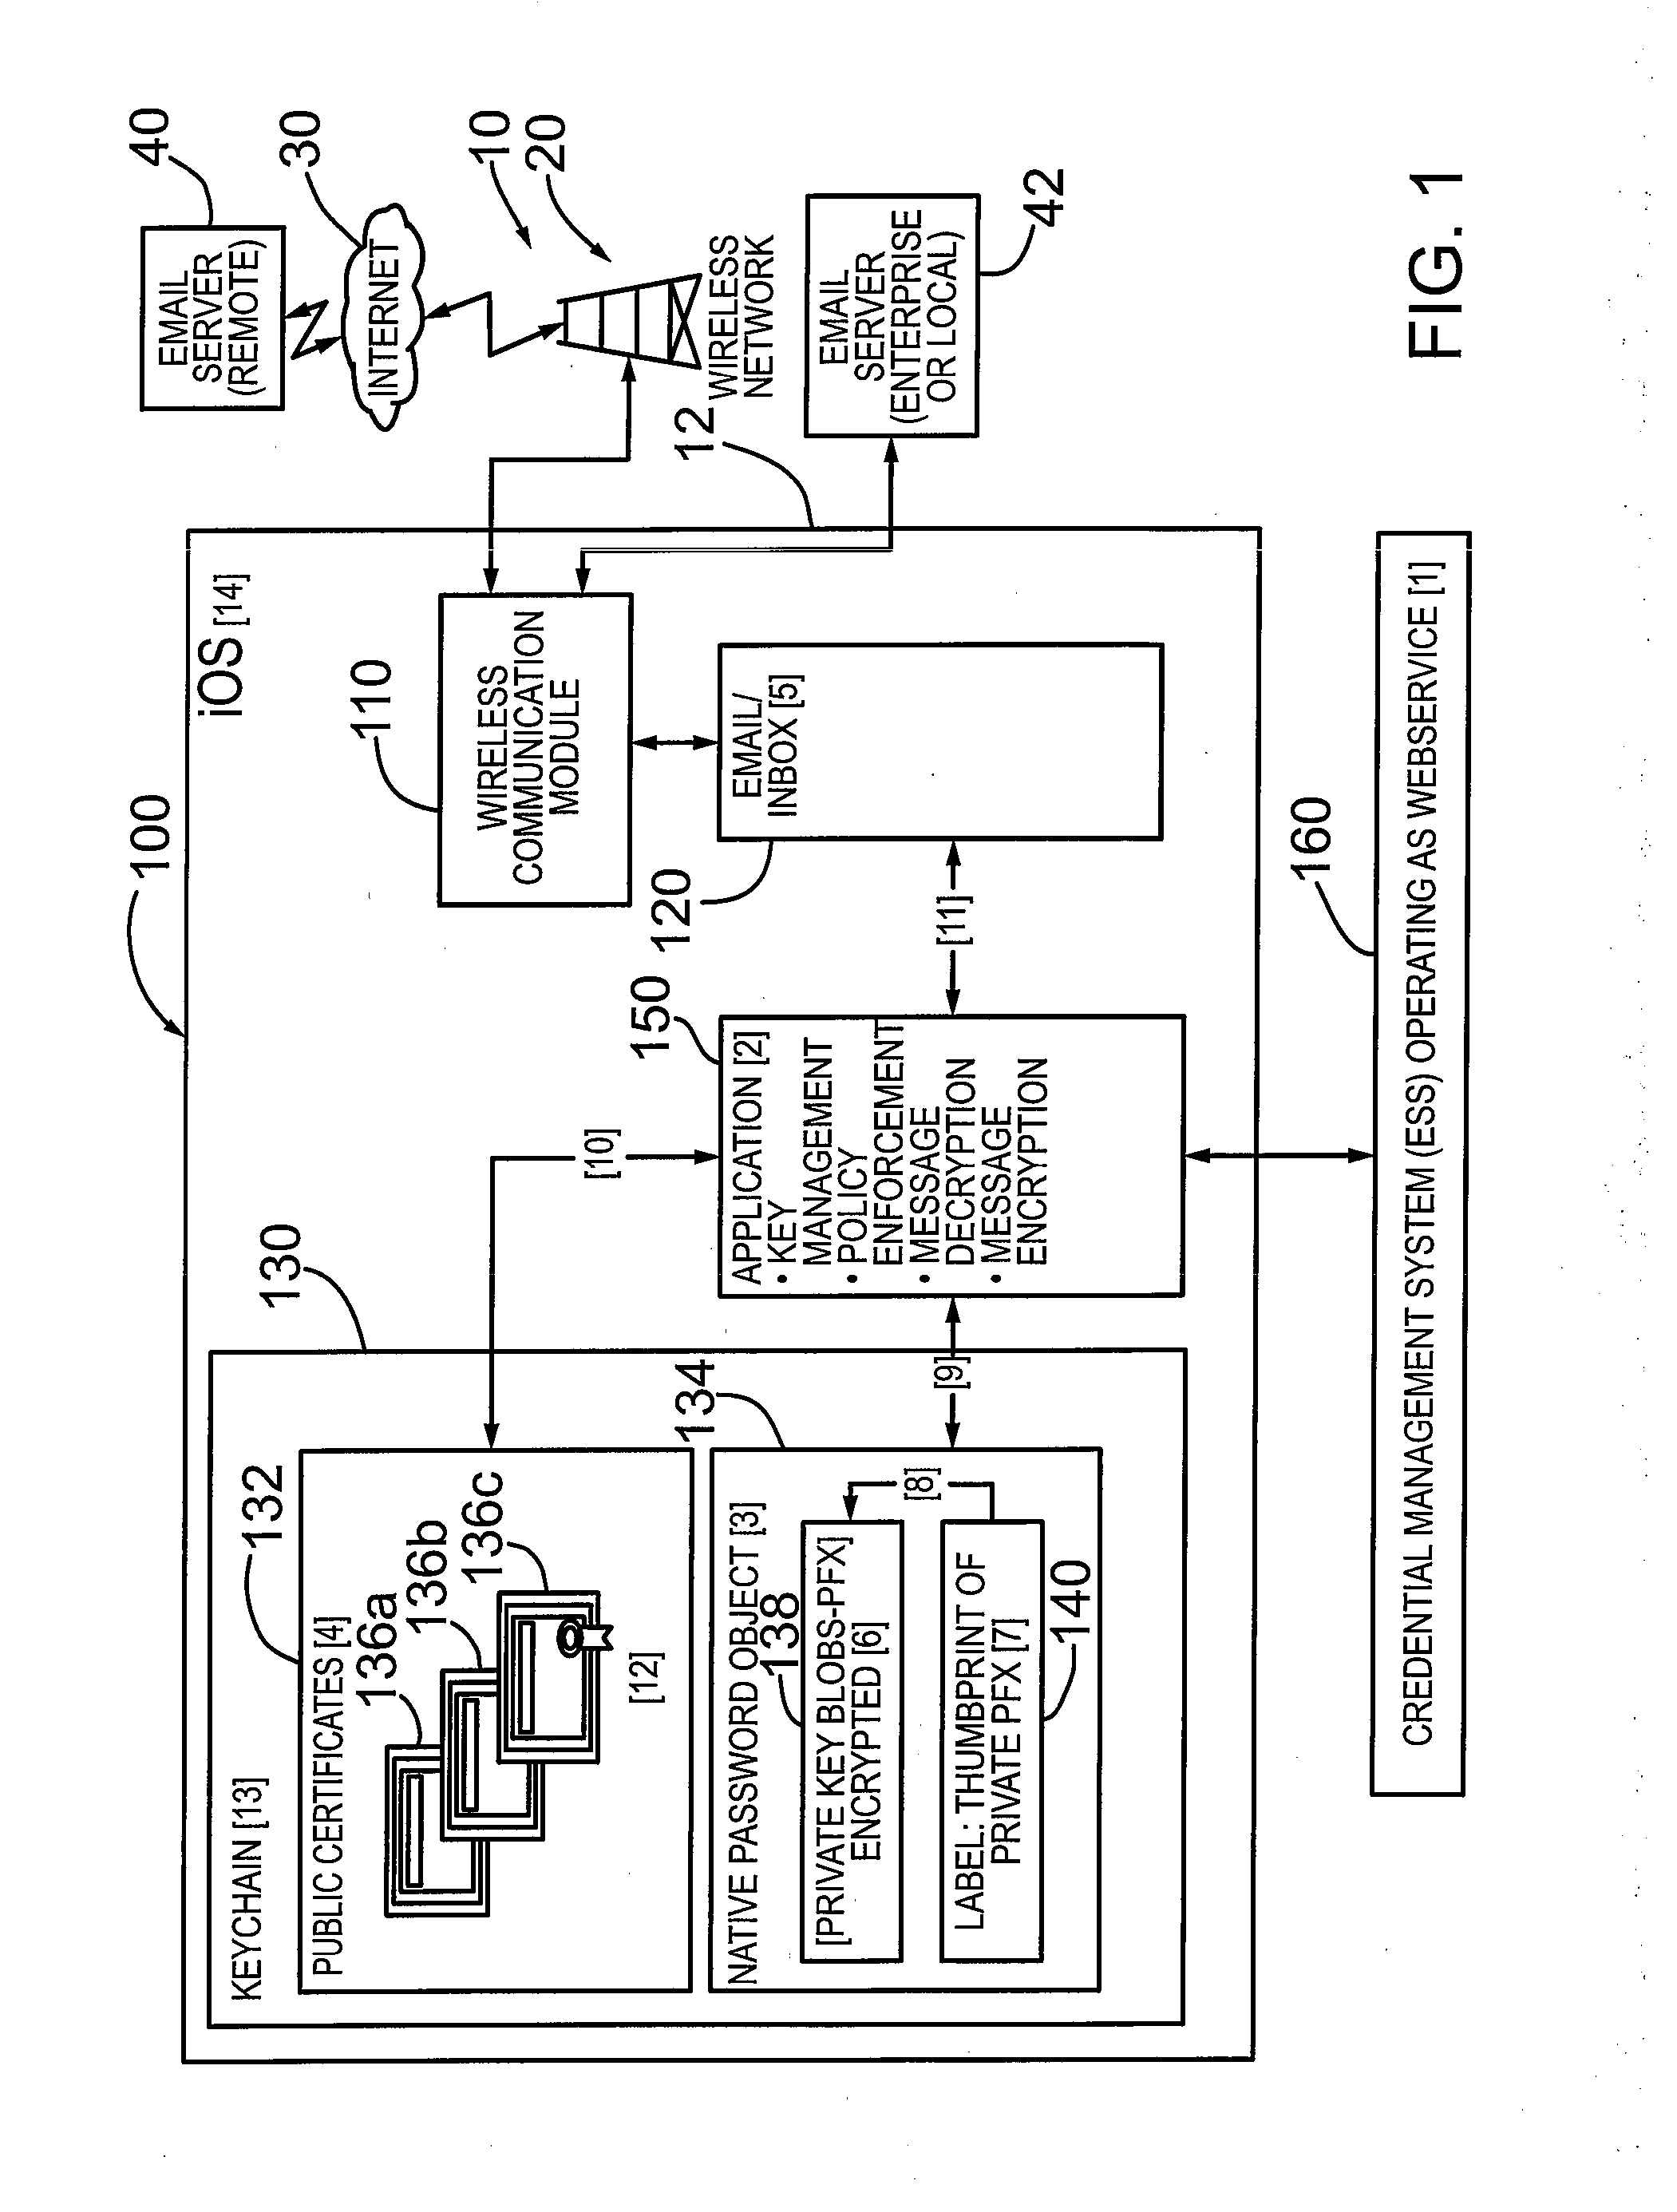 Mechanism and method for managing credentials on ios based operating system